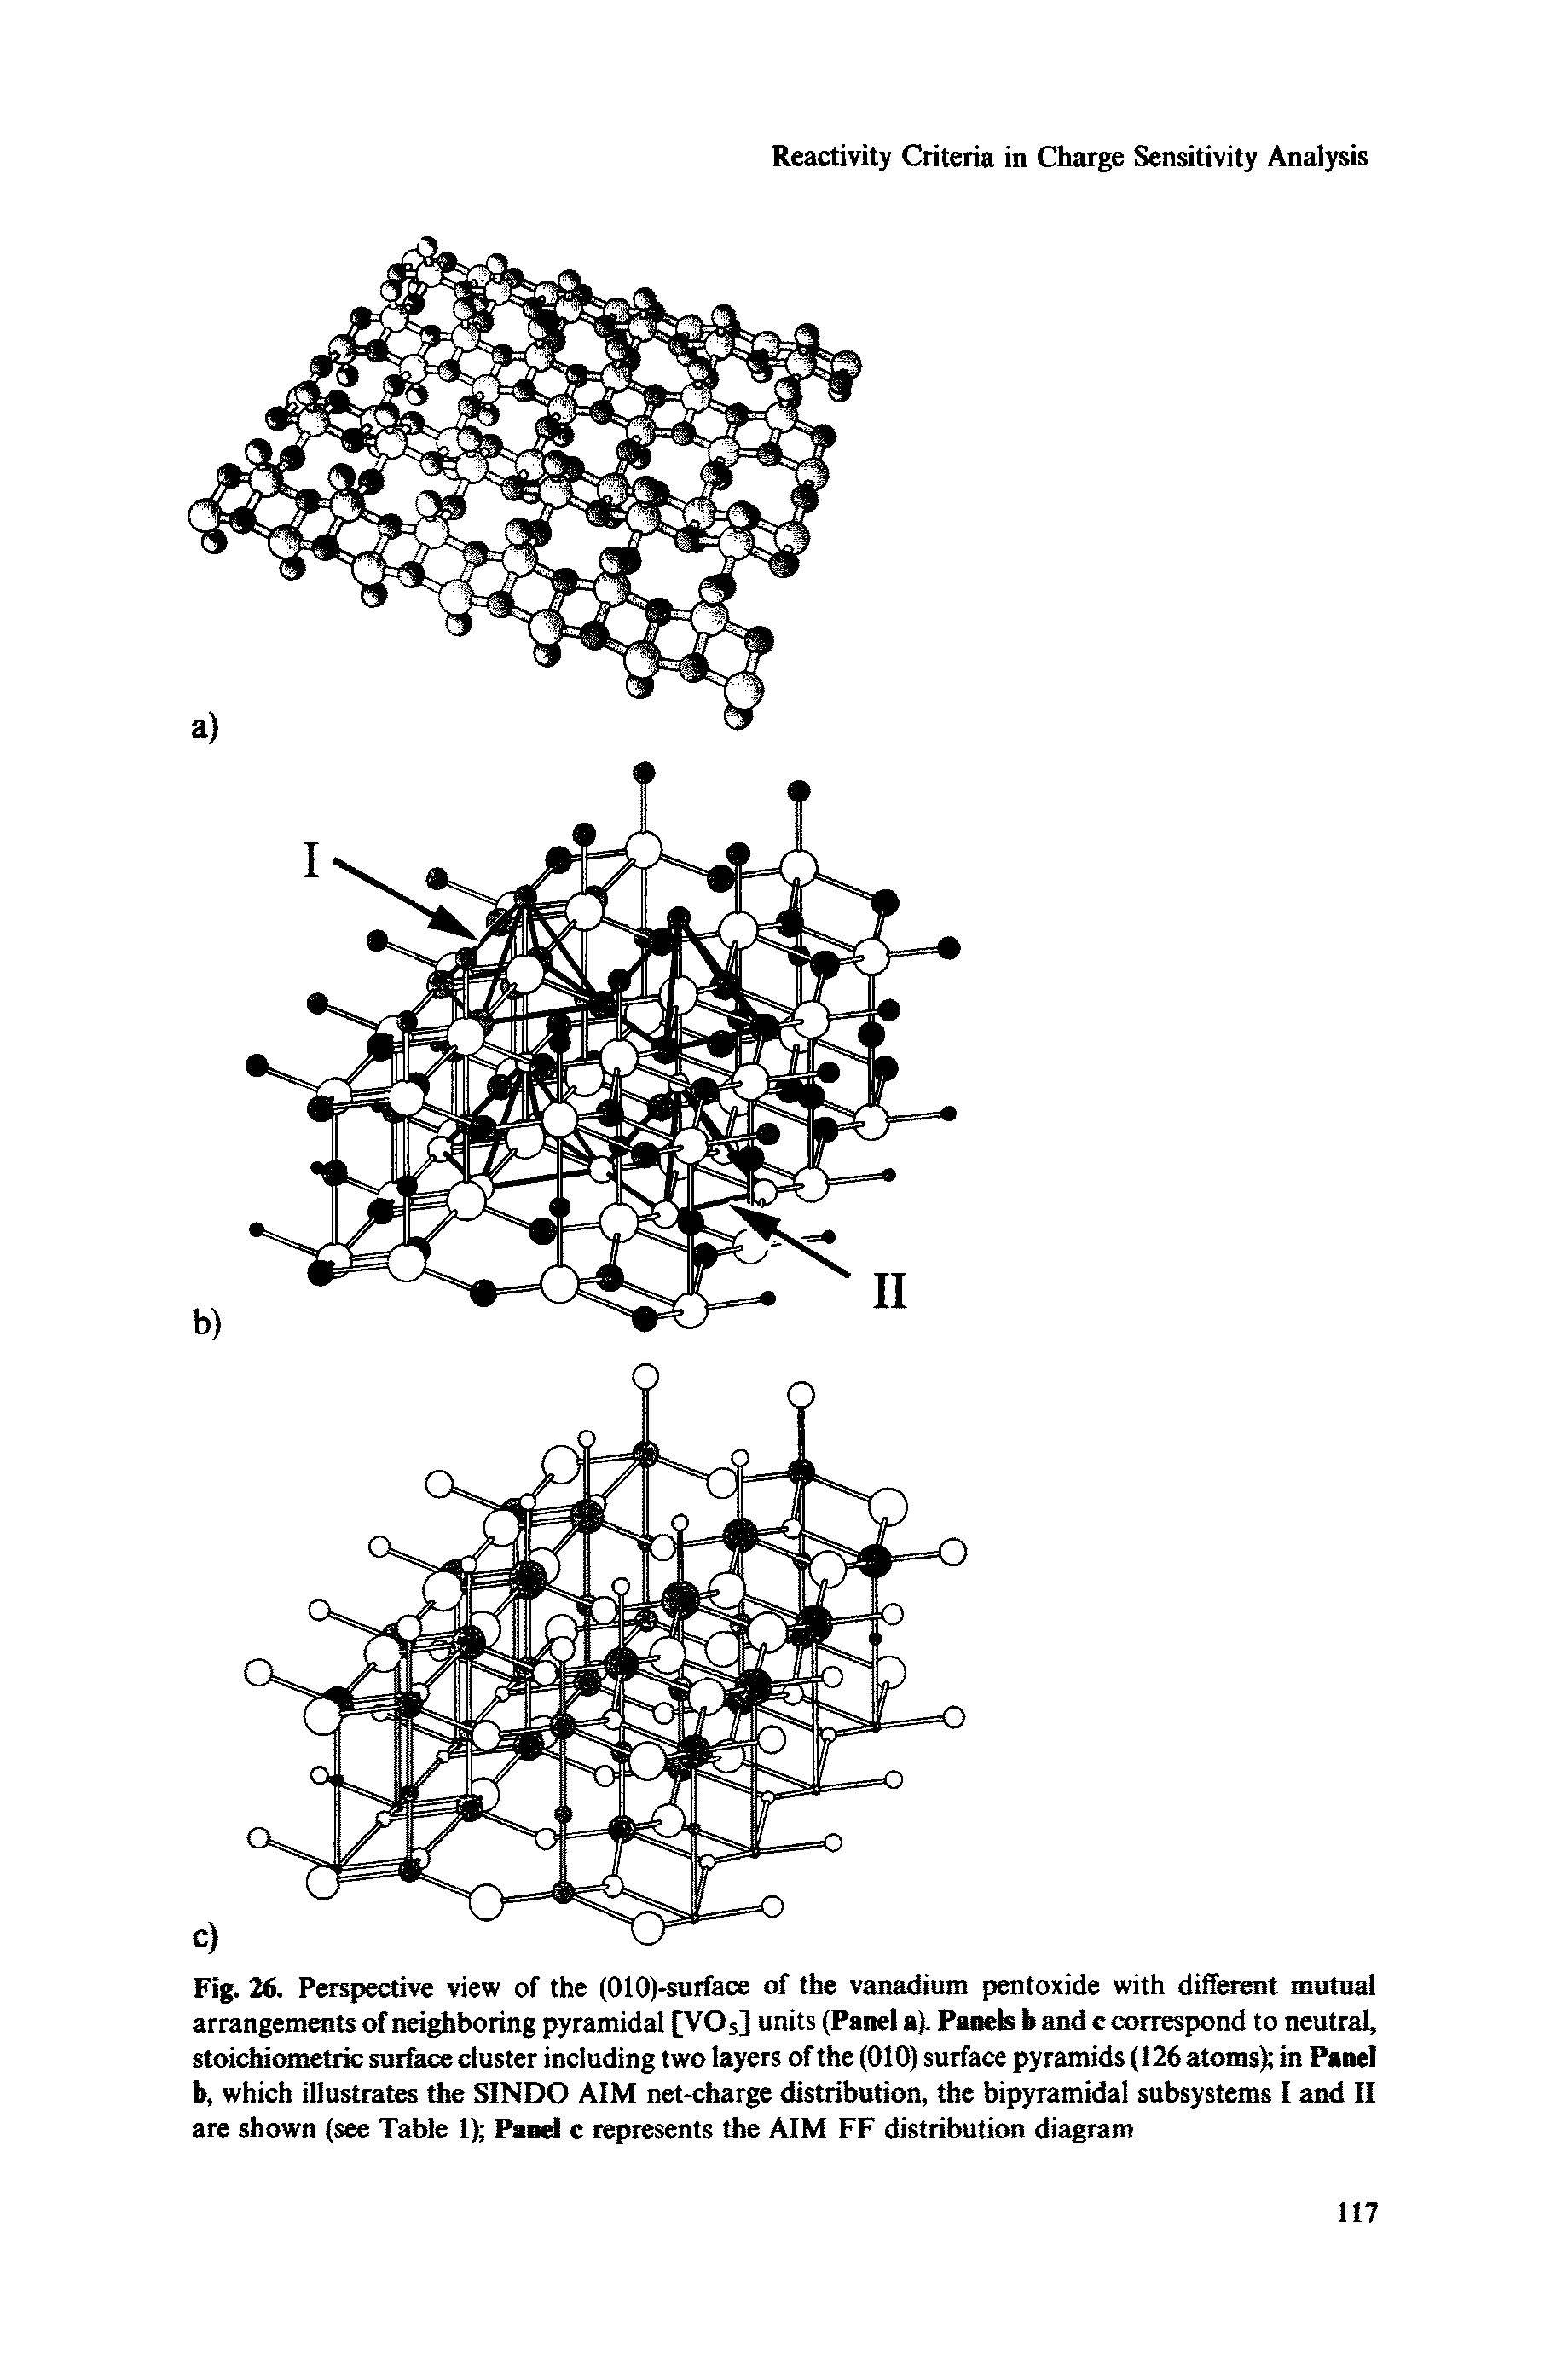 Fig. 26. Perspective view of the (010)-surface of the vanadium pentoxide with different mutual arrangements of neighboring pyramidal [VOs] units (Panel a). Panels b and c correspond to neutral, stoichiometric surface cluster including two layers of the (010) surface pyramids (126 atoms) in Panel b, which illustrates the SINDO AIM net-charge distribution, the bipyramidal subsystems I and II are shown (see Table 1) Panel c represents the AIM FF distribution diagram...